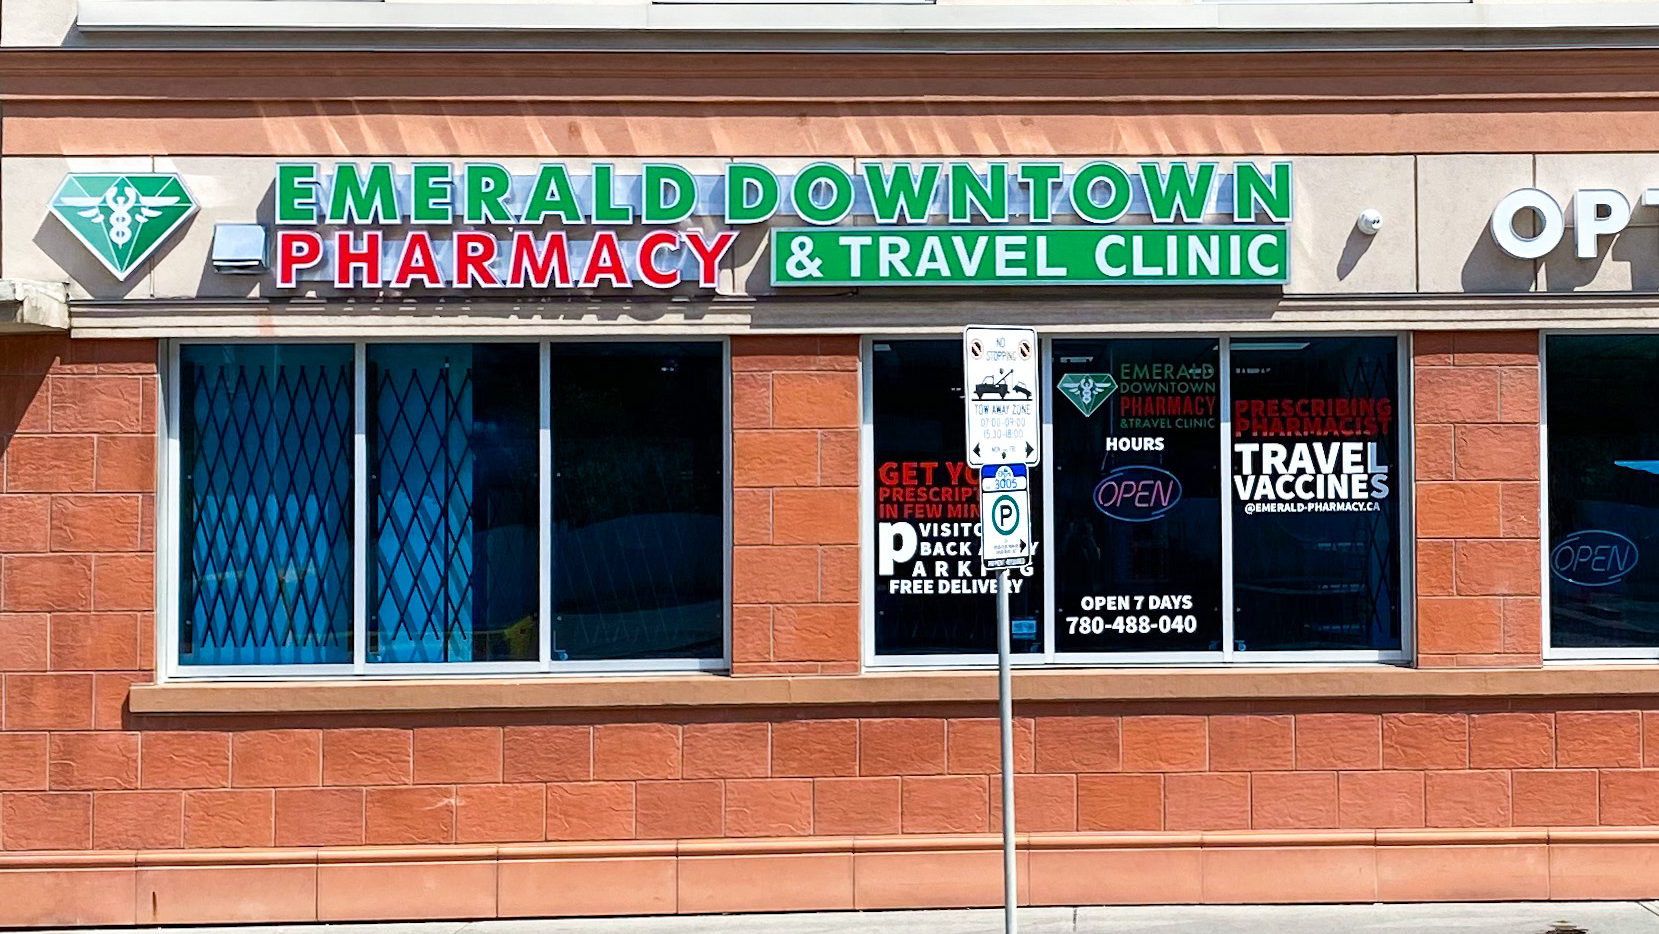 Emerald Downtown Pharmacy &Travel Clinic